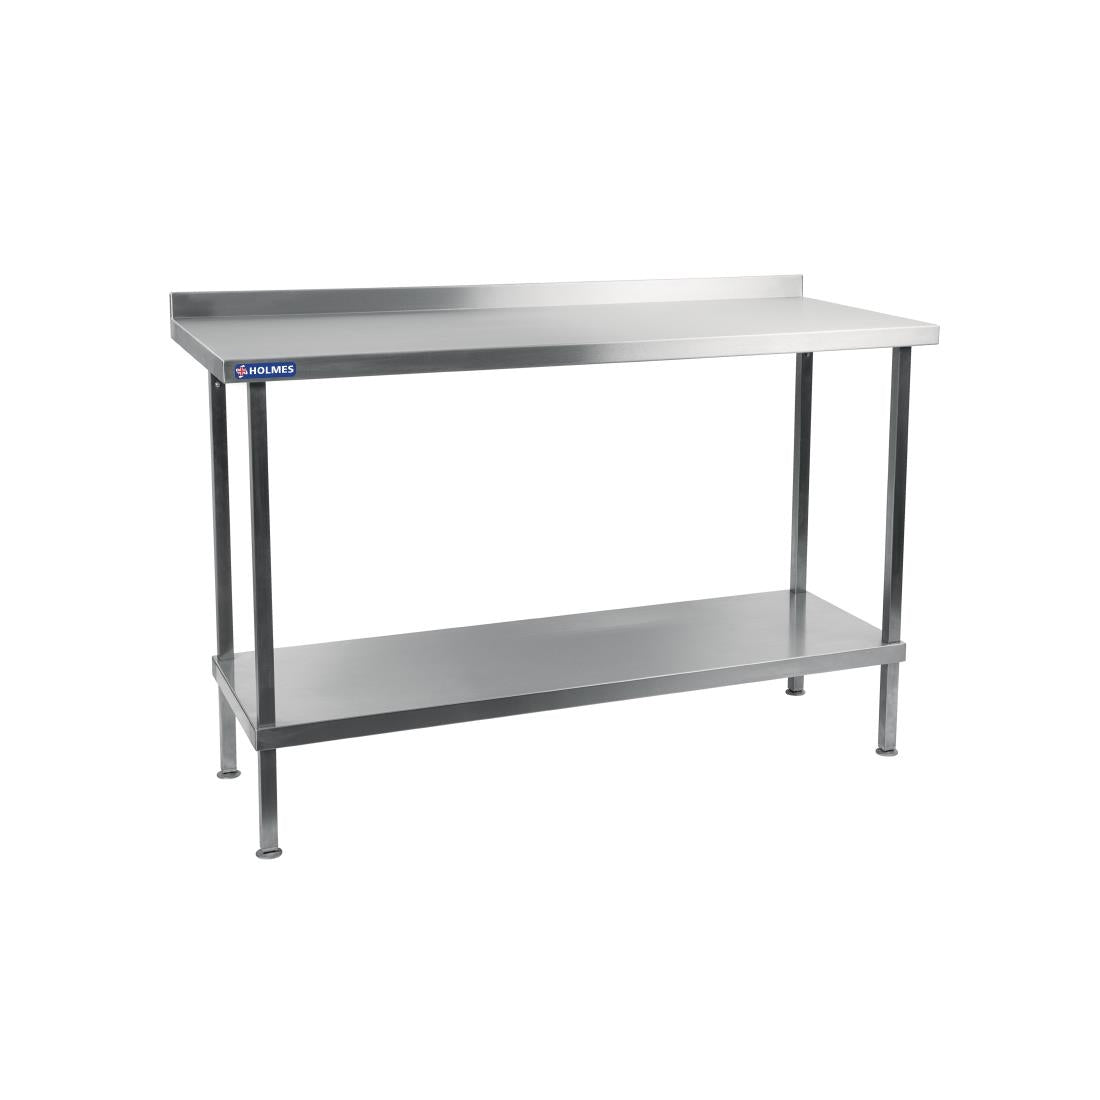 DR028 Holmes Stainless Steel Wall Table with Upstand 900mm JD Catering Equipment Solutions Ltd